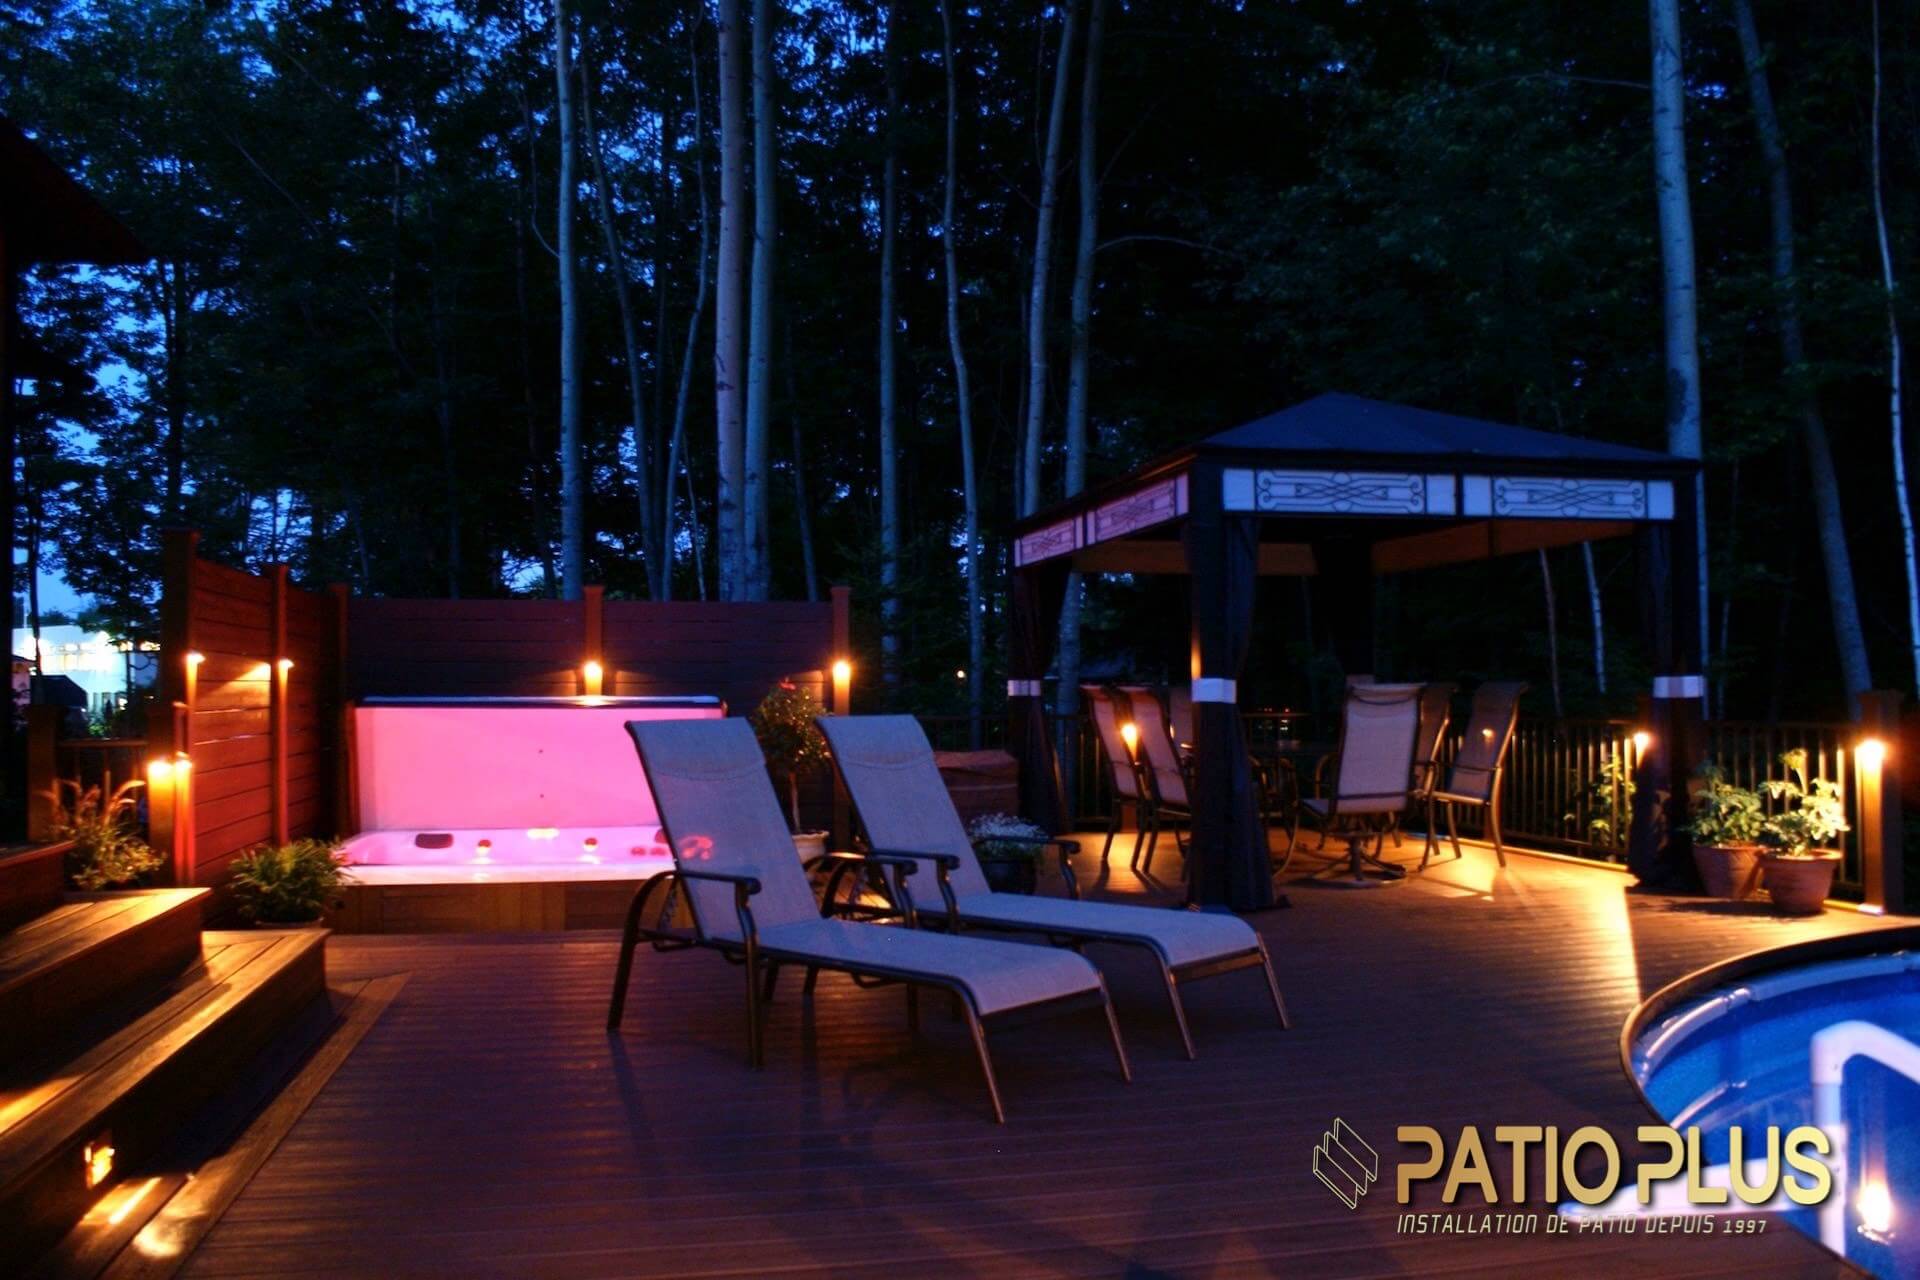 night image of a wooden deck with a spa